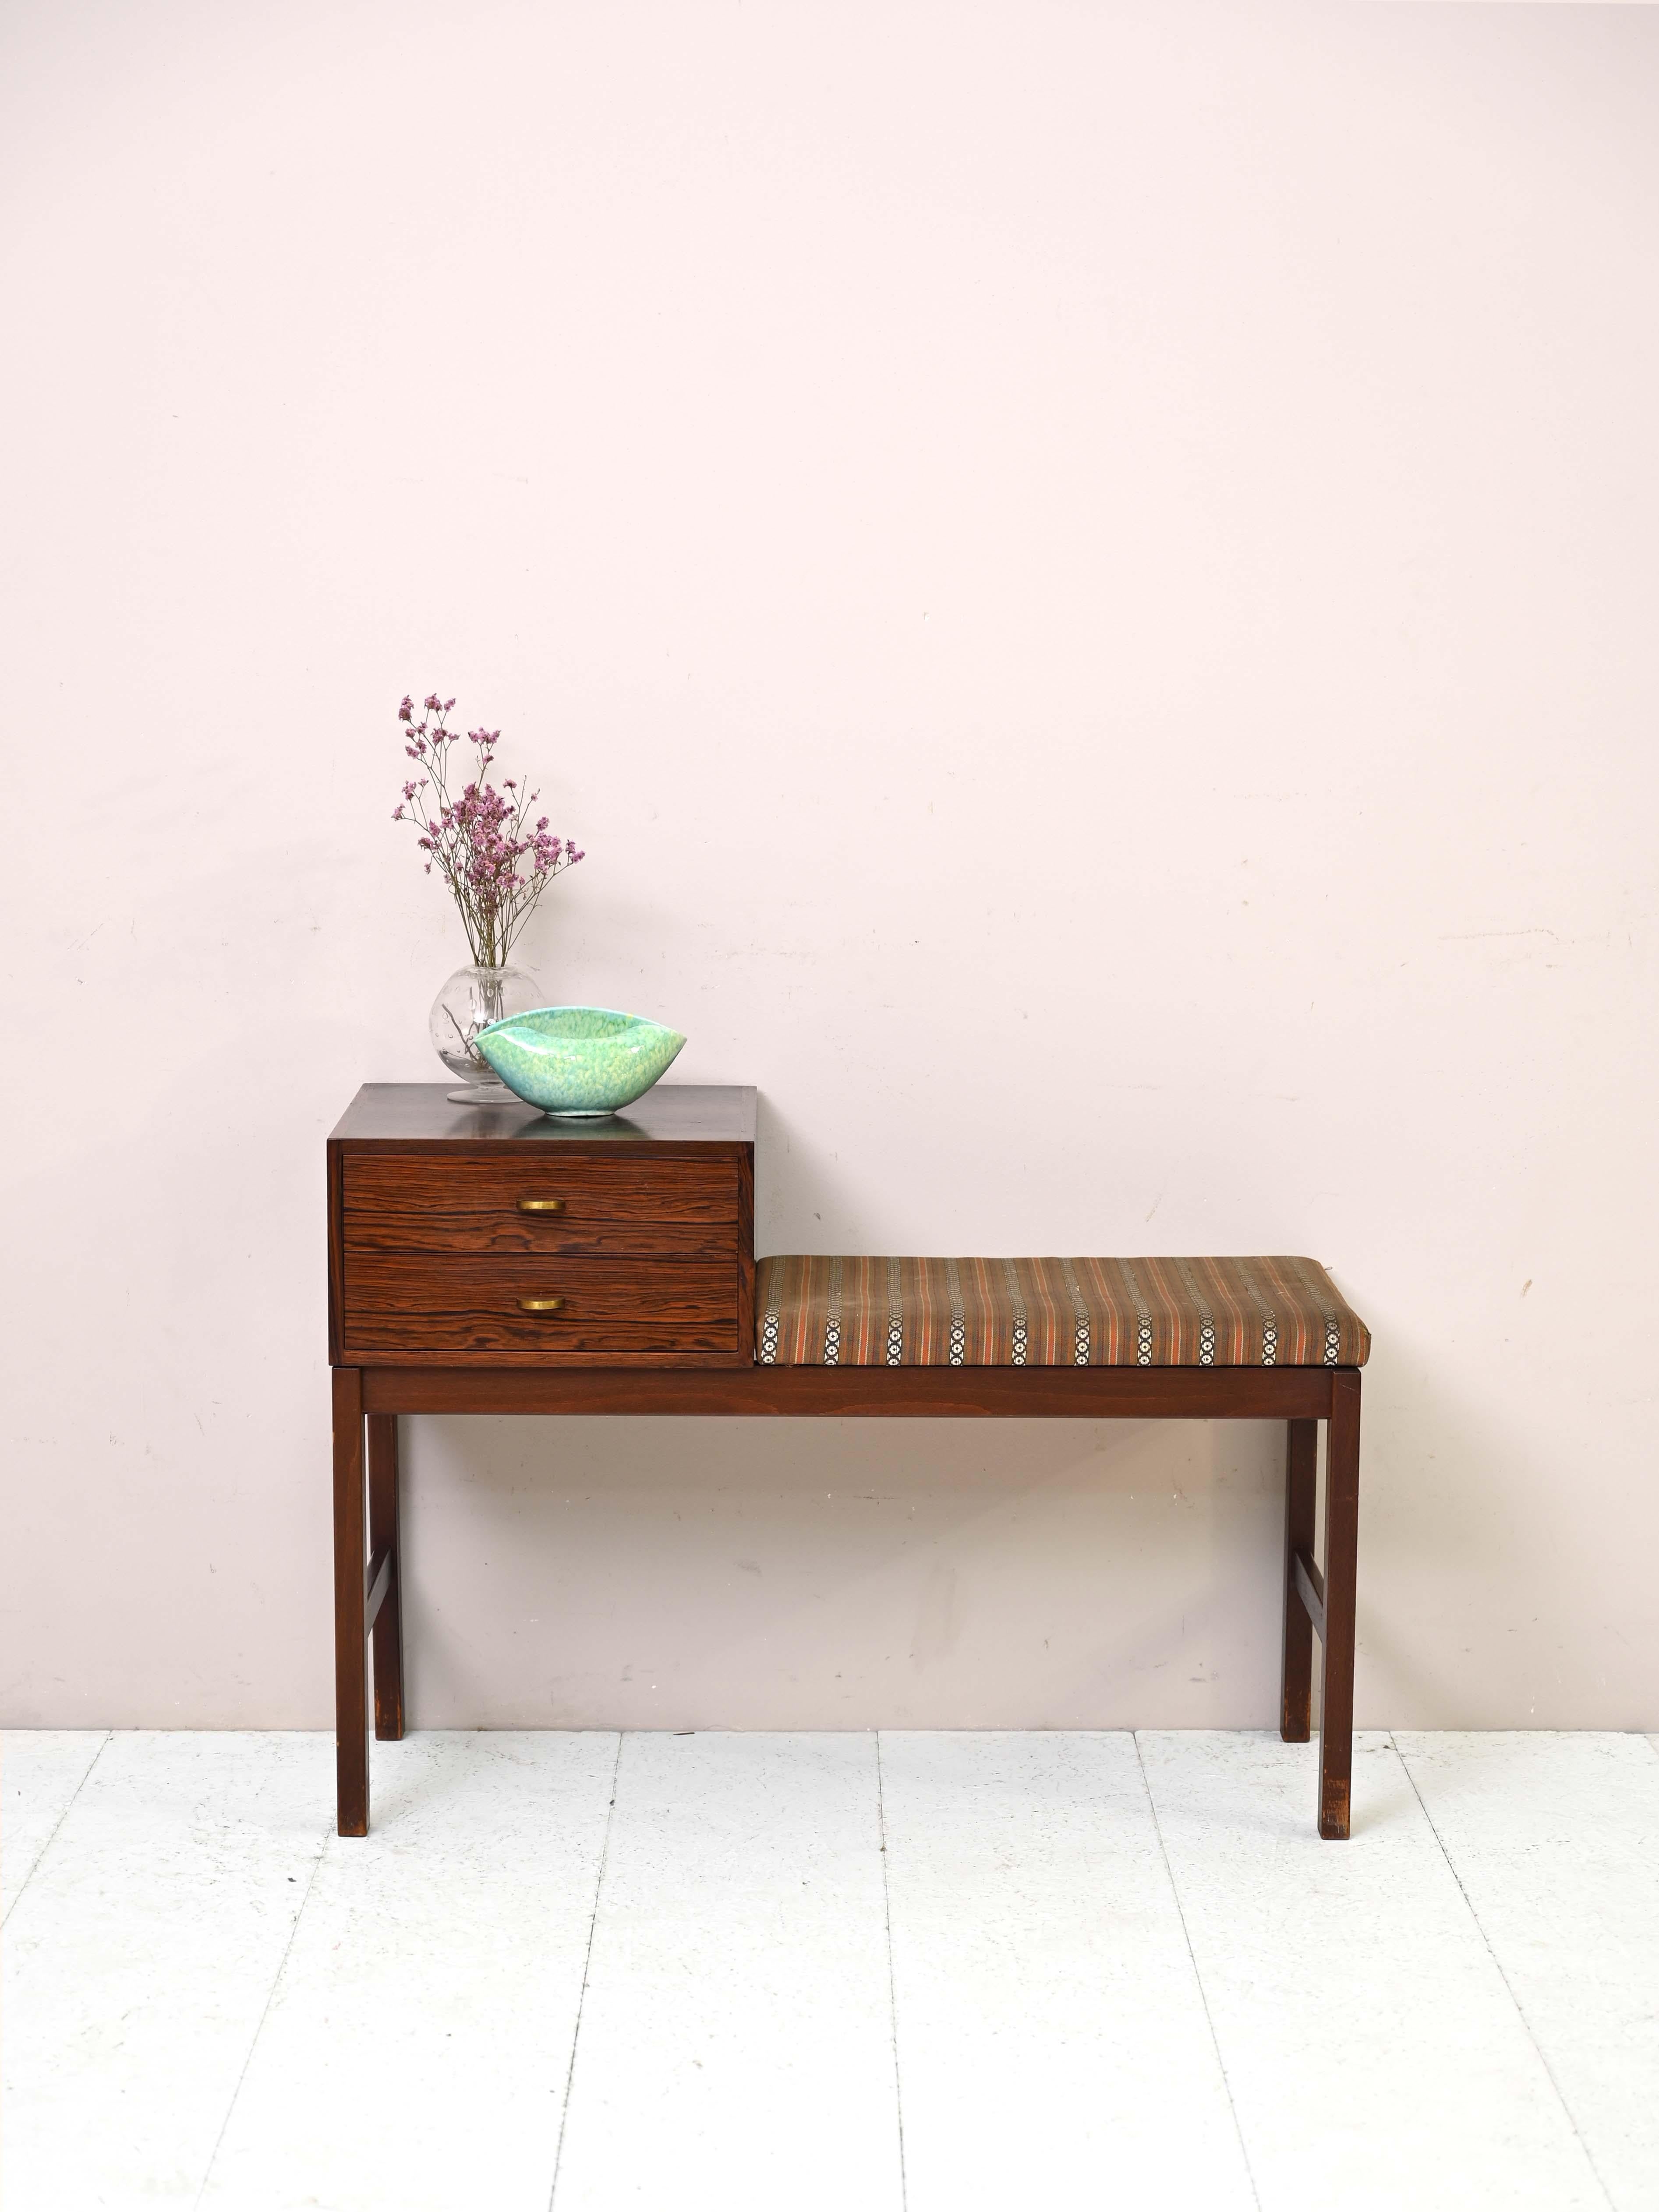 Scandinavian 1960s bench in rosewood.

An original piece of furniture, ideal for the entryway, created as a telephone cabinet with an integrated seat.
Consists of simple square legs, an upholstered seat reupholstered with original period fabric,